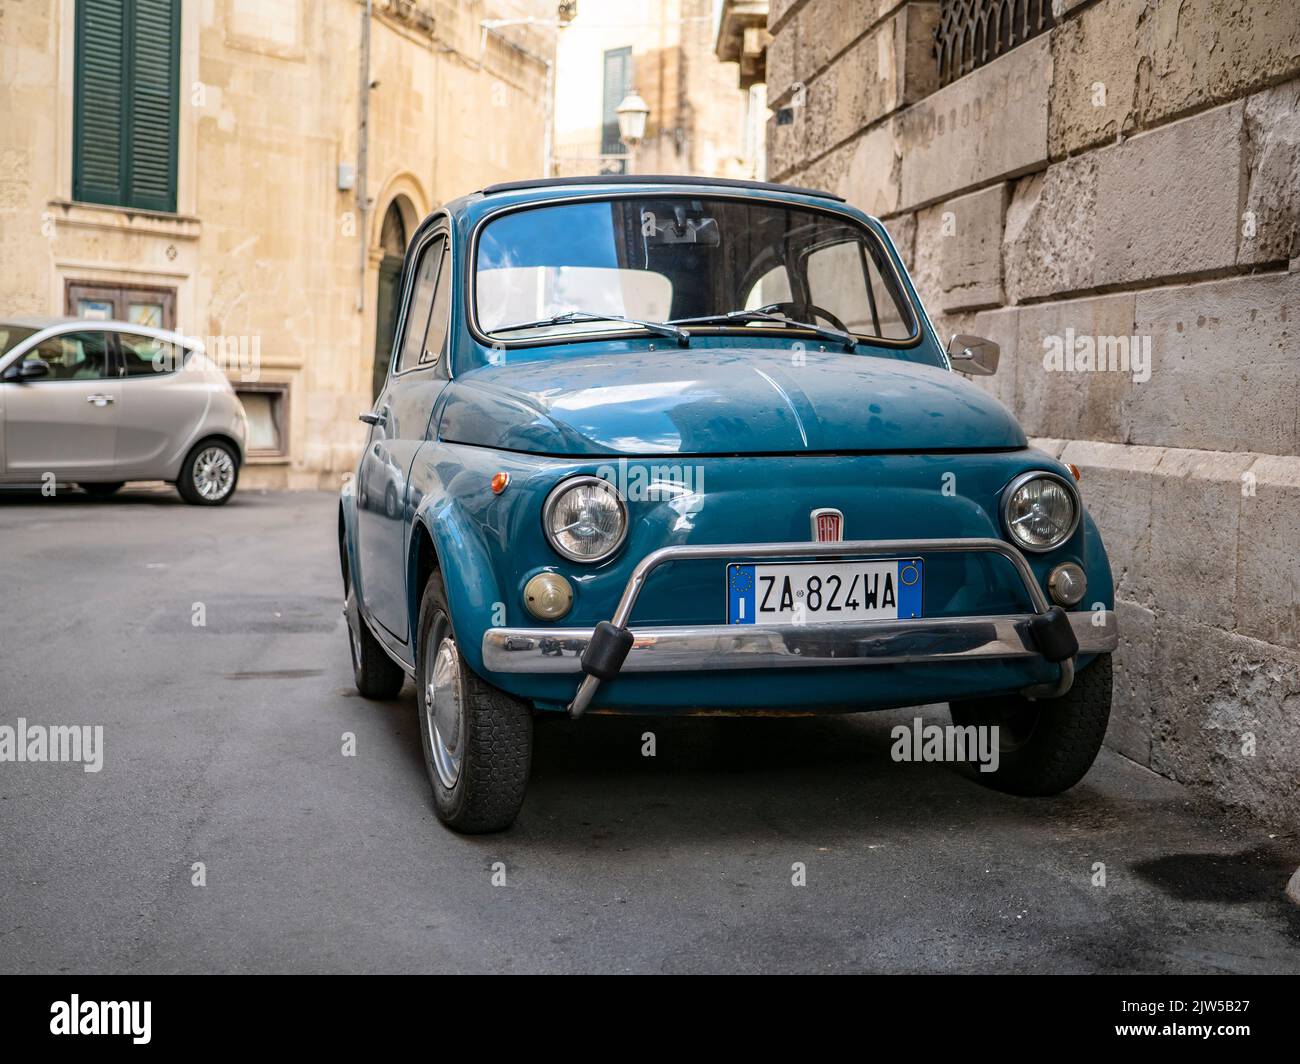 LECCE, ITALY - OCTOBER 27, 2021: Fiat 500 vintage car in narrow streets of Lecce in Italy Stock Photo